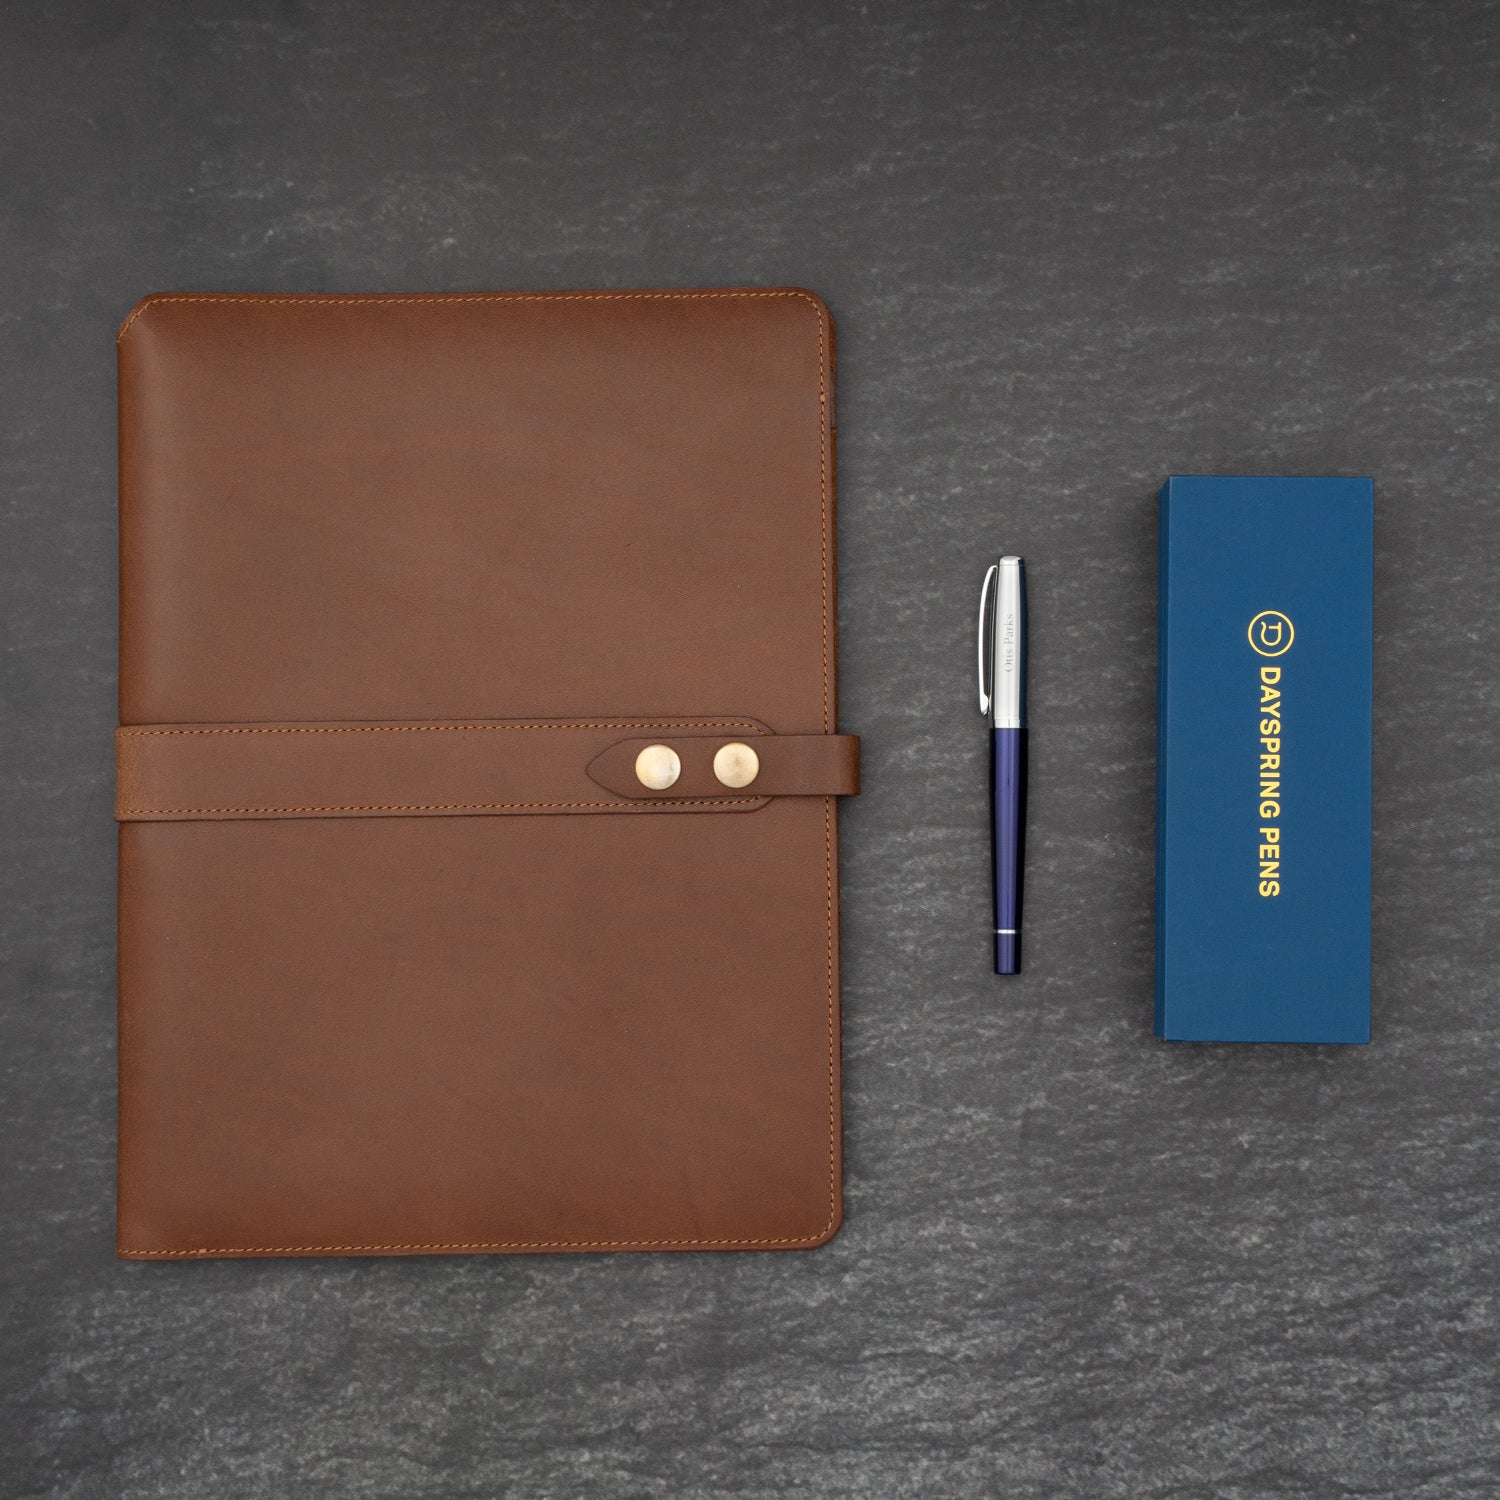 The A4 Natural Leather Padfolio with an Abingdon Blue Rollerball